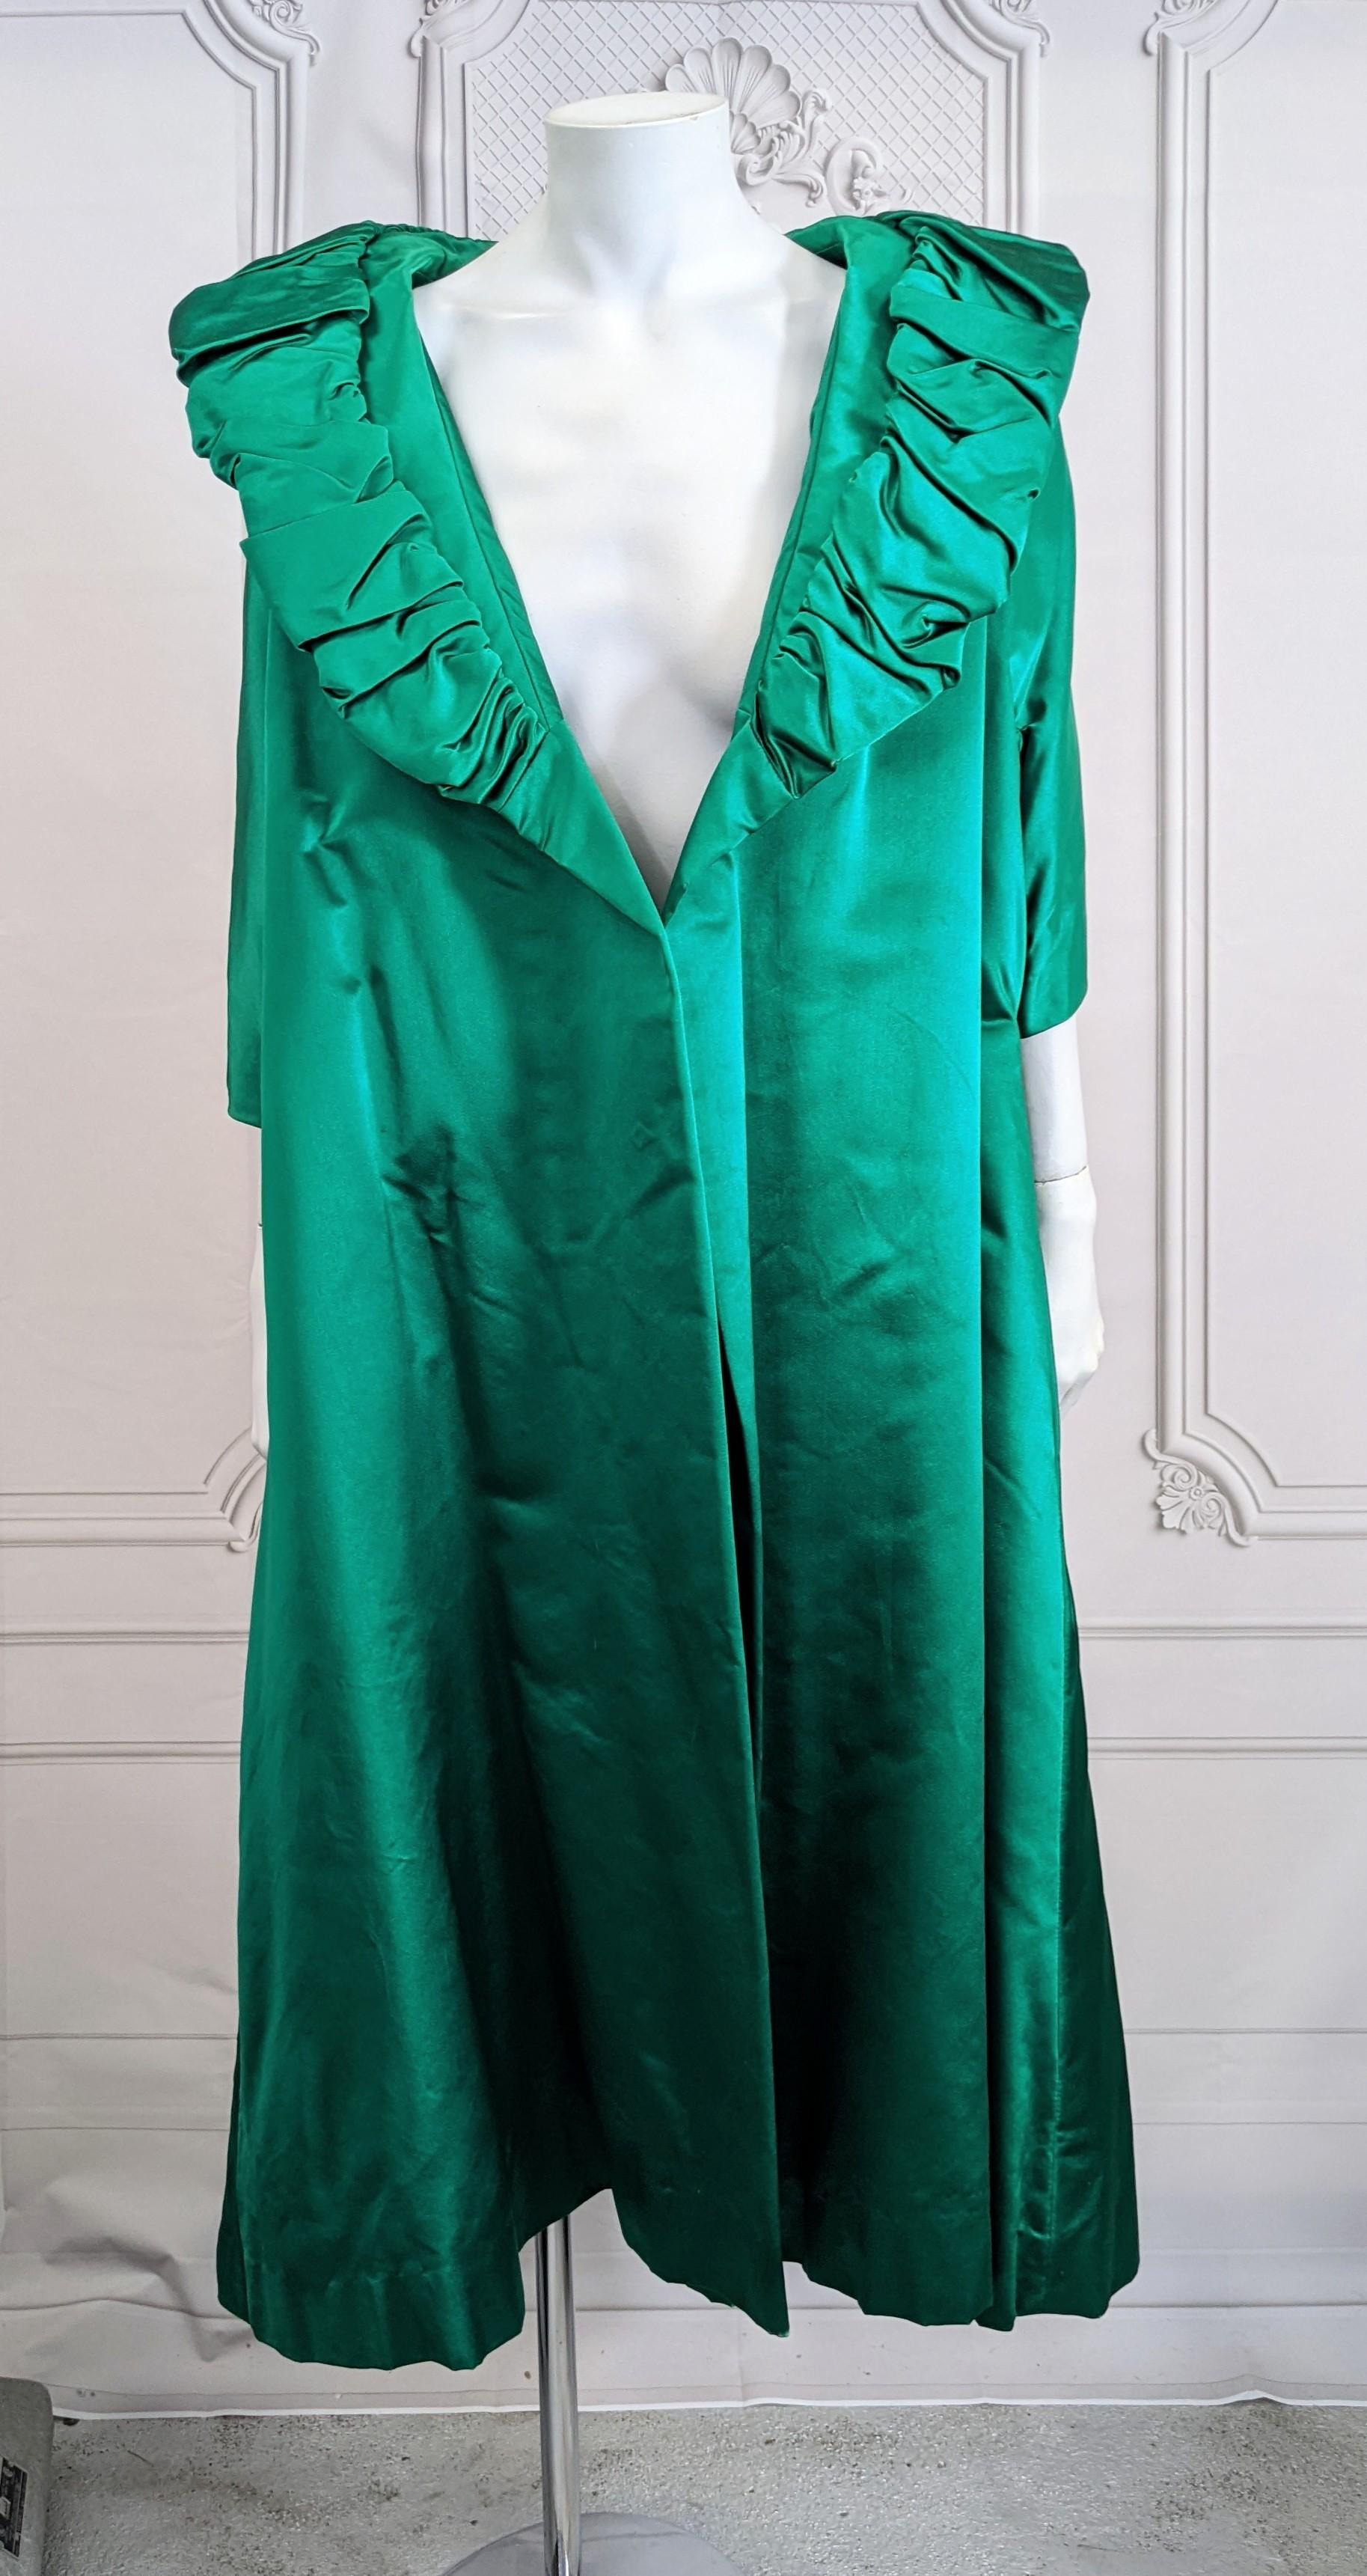 Dramatic Emerald Silk Satin Opera Coat from the 1950's cut to be worn open or clutched. No closures. Heavy weight satin with stiff backing. Cut very wide in a square shape with tight high 3/4 sleeves. 1950's USA, Lined. Collar is tacked down.